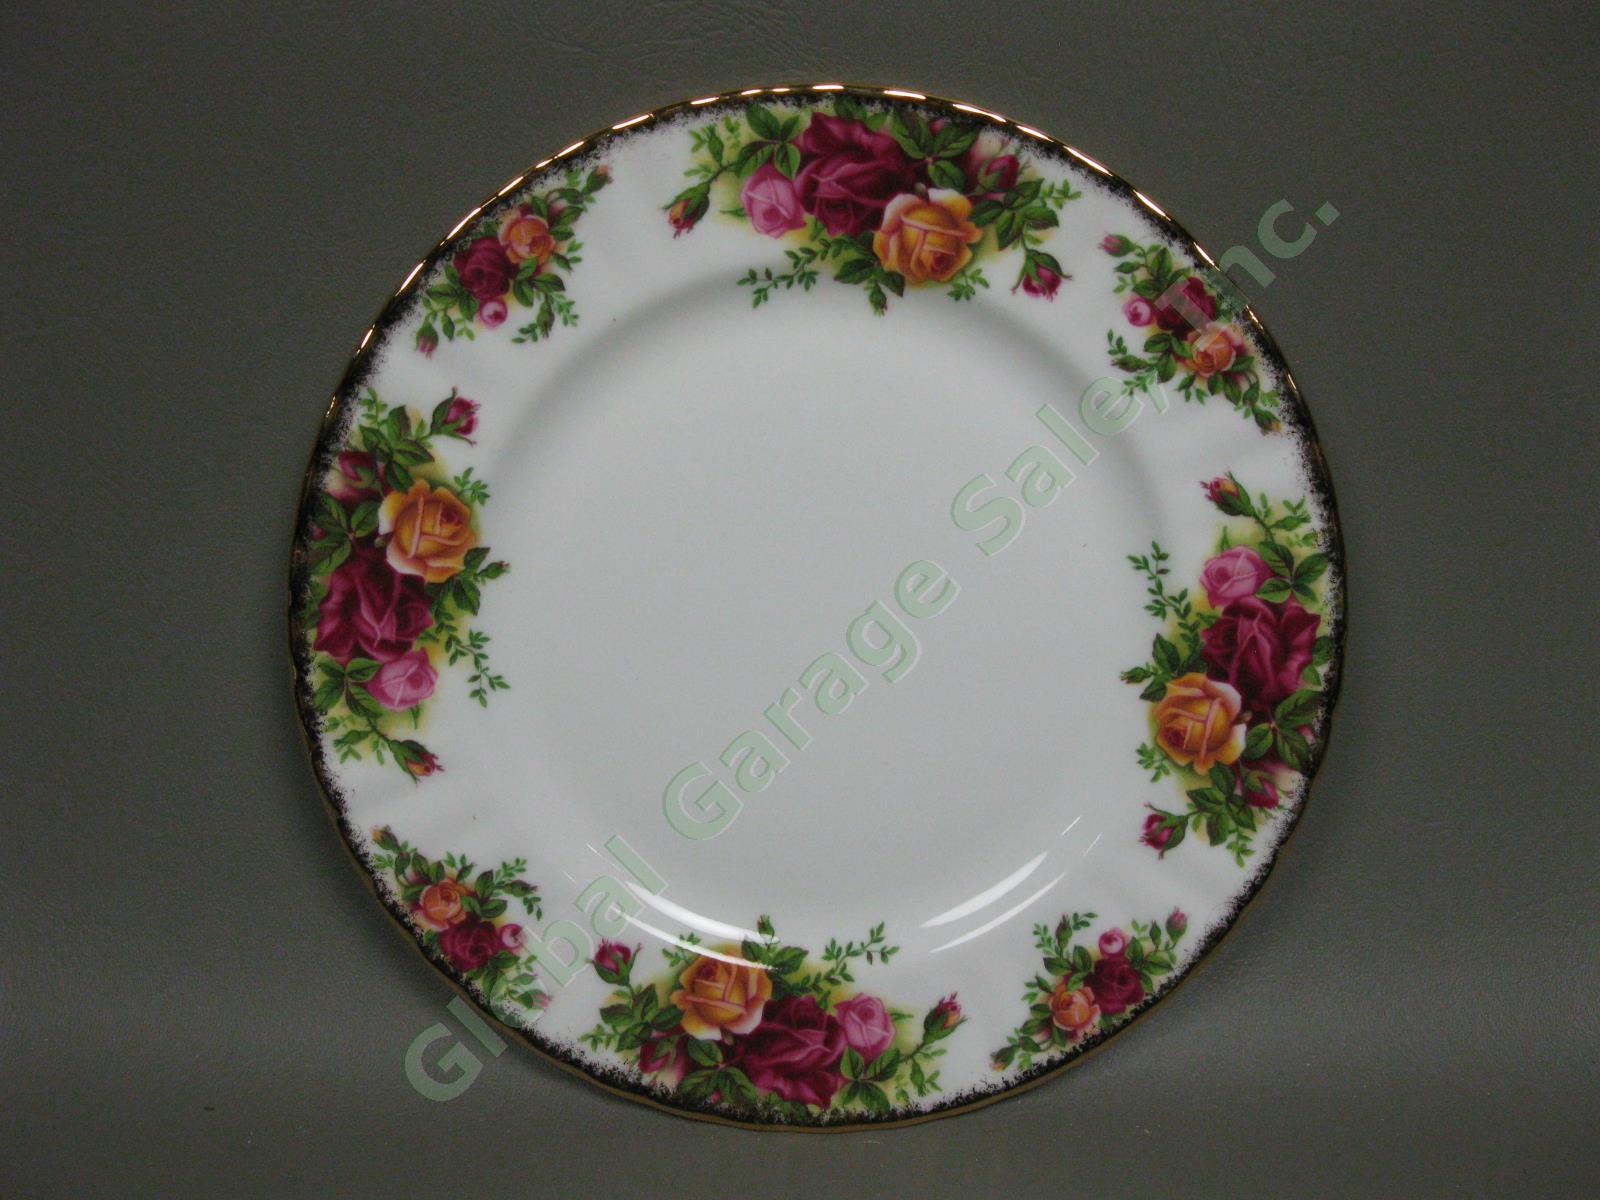 4 Royal Albert Old Country Roses Place Settings Serving Bowl Platter Plate Set 12